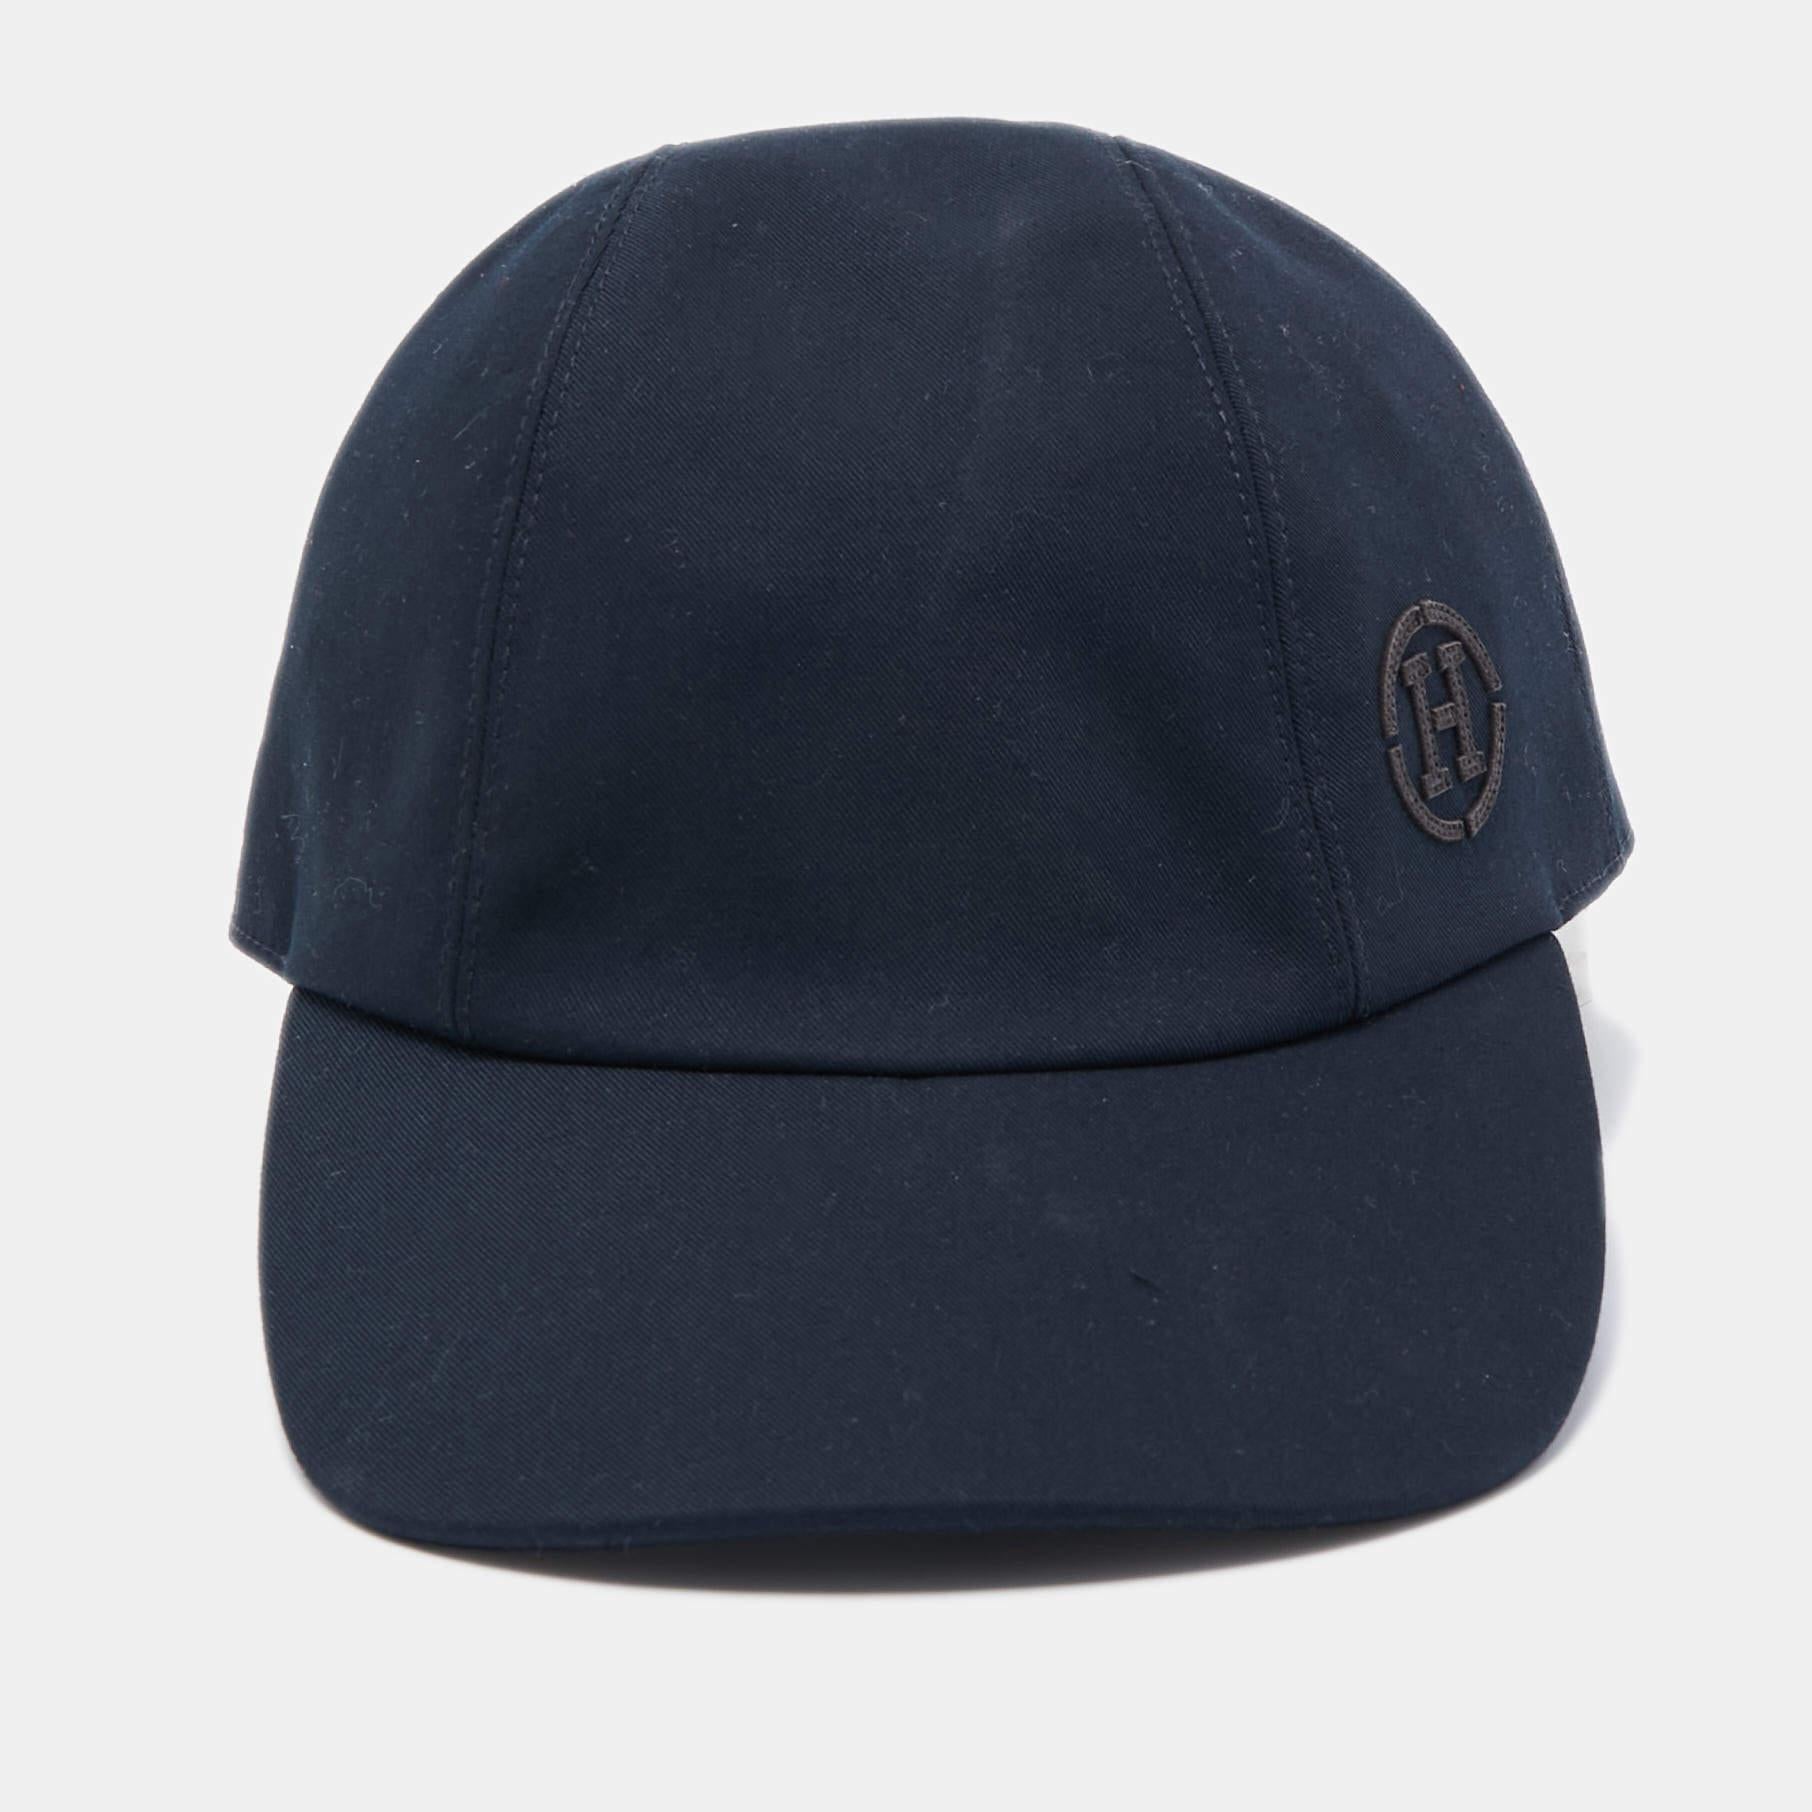 Embrace a casual day with luxurious fashion by adding this designer cap while you step out. Made from quality materials, it comes in a navy blue shade.

Includes: Price Tag